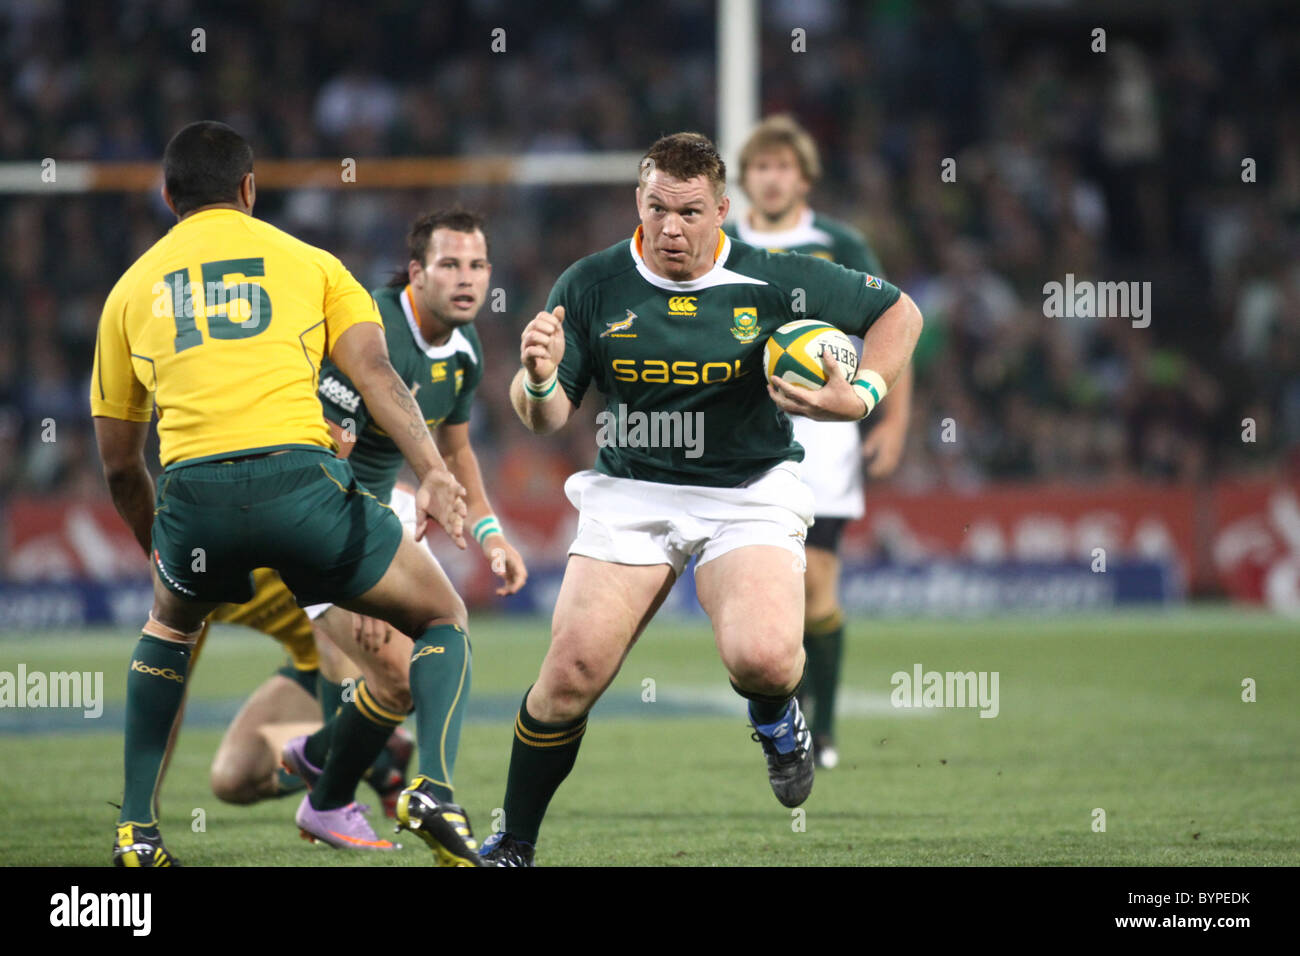 John Smith, running with the ball, ready to score a try. Stock Photo